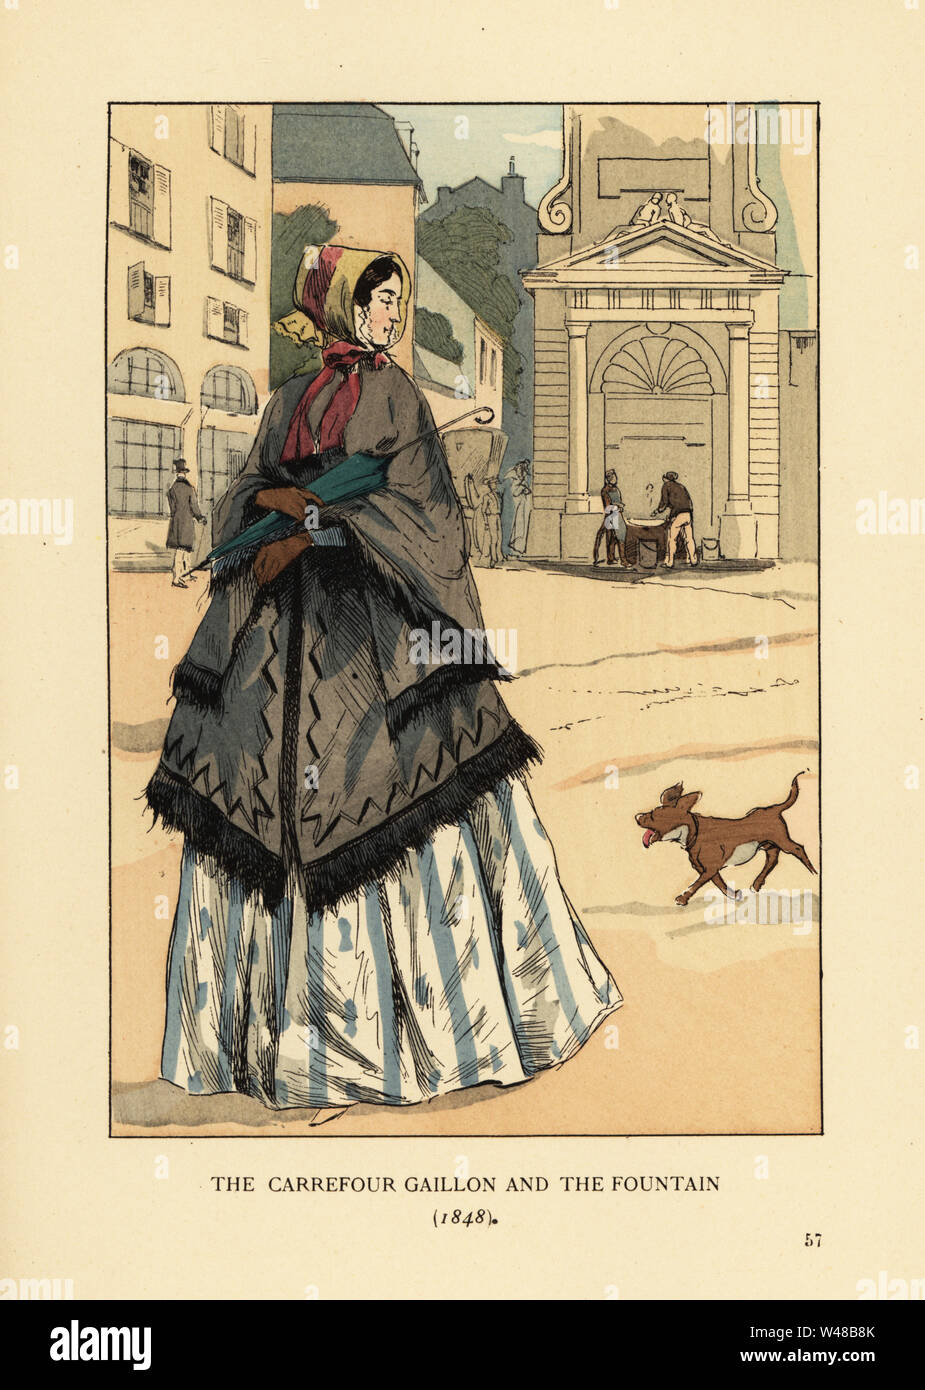 Woman in front of the fountain at Place Gaillon, Paris. She wears a cashmere shawl with arm holes called la visite over her crinoline. The carrefour Gaillon and the fountain, 1848. Handcoloured lithograph by R.V. after an illustration by Francois Courboin from Octave Uzanne’s Fashion in Paris, William Heinemann, London, 1898. Stock Photo